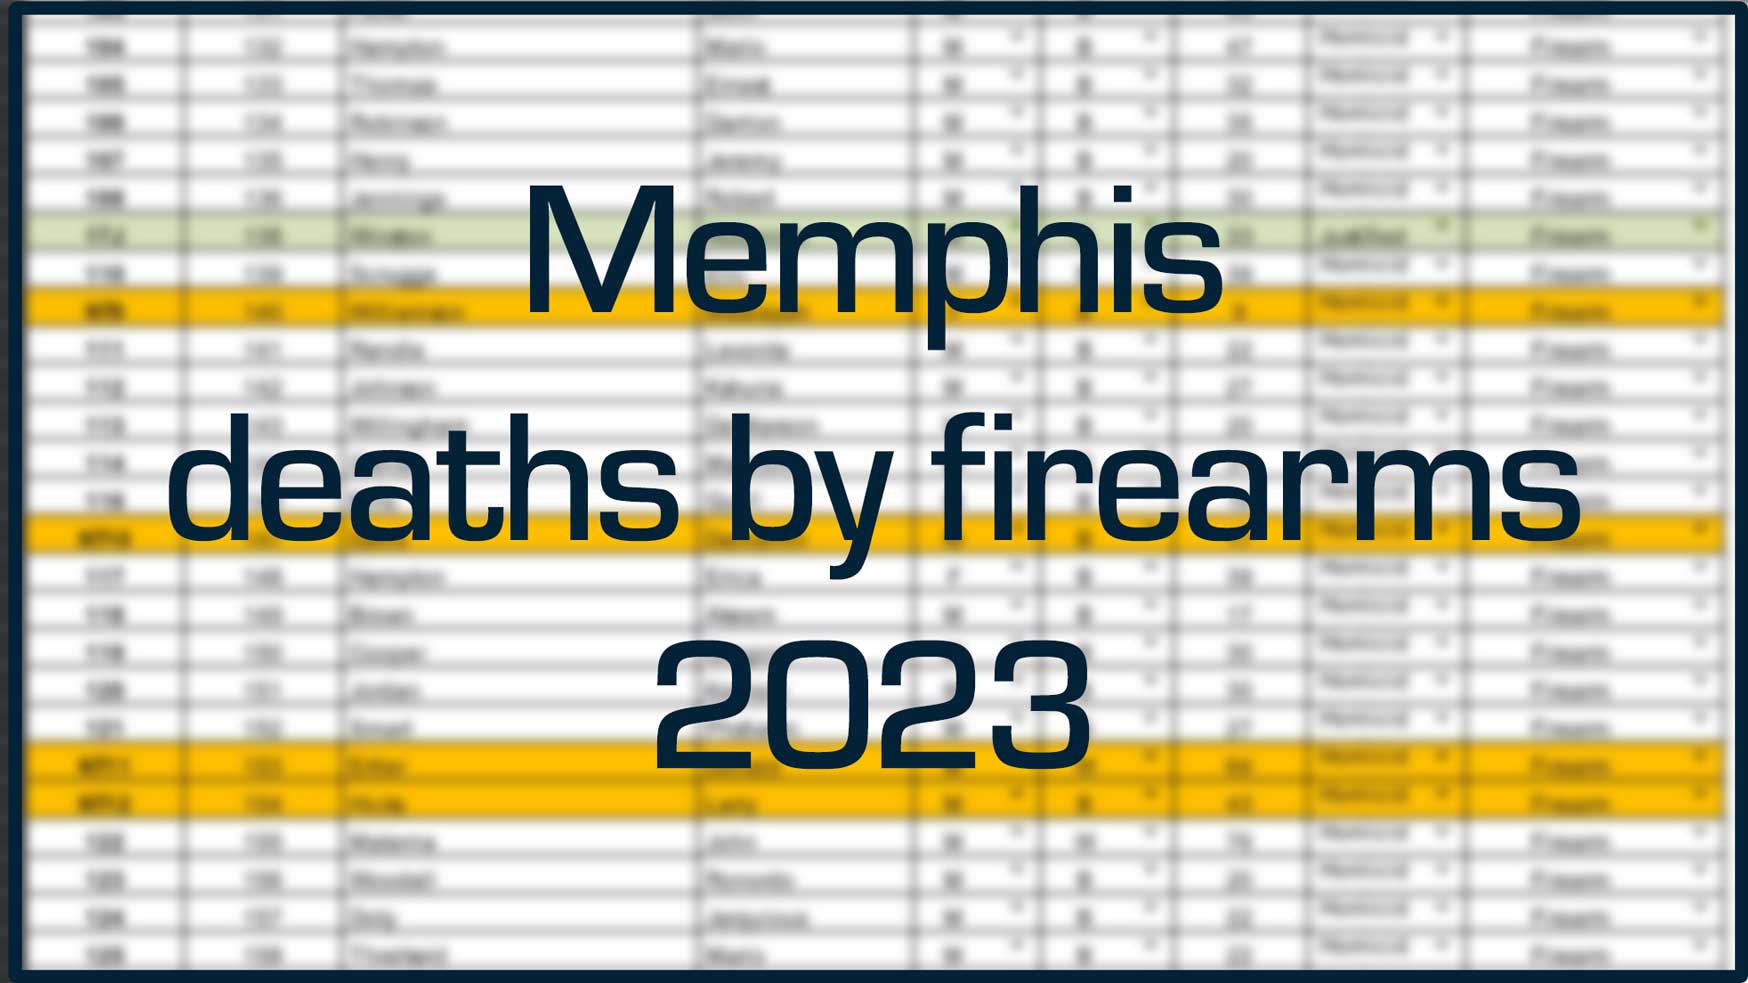 <strong>Memphis deaths by firearms 2023</strong>